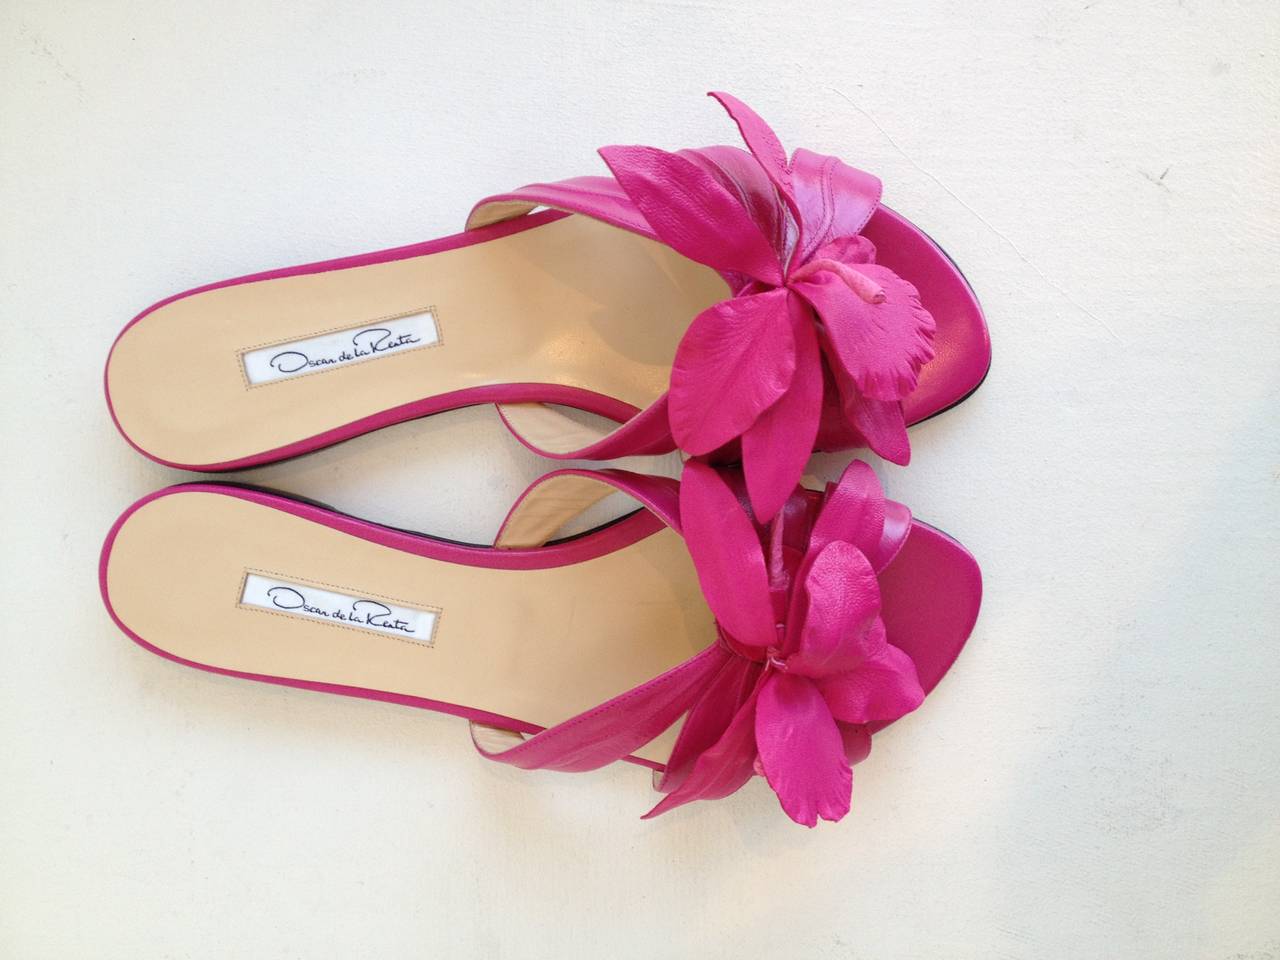 These beautiful Oscar de la Renta slides will transport you somewhere tropical, whether you're vacationing in Saint Lucia this summer or staying home. The fuchsia leather bands that cross the toes are shaped like leaves, and the center is decorated